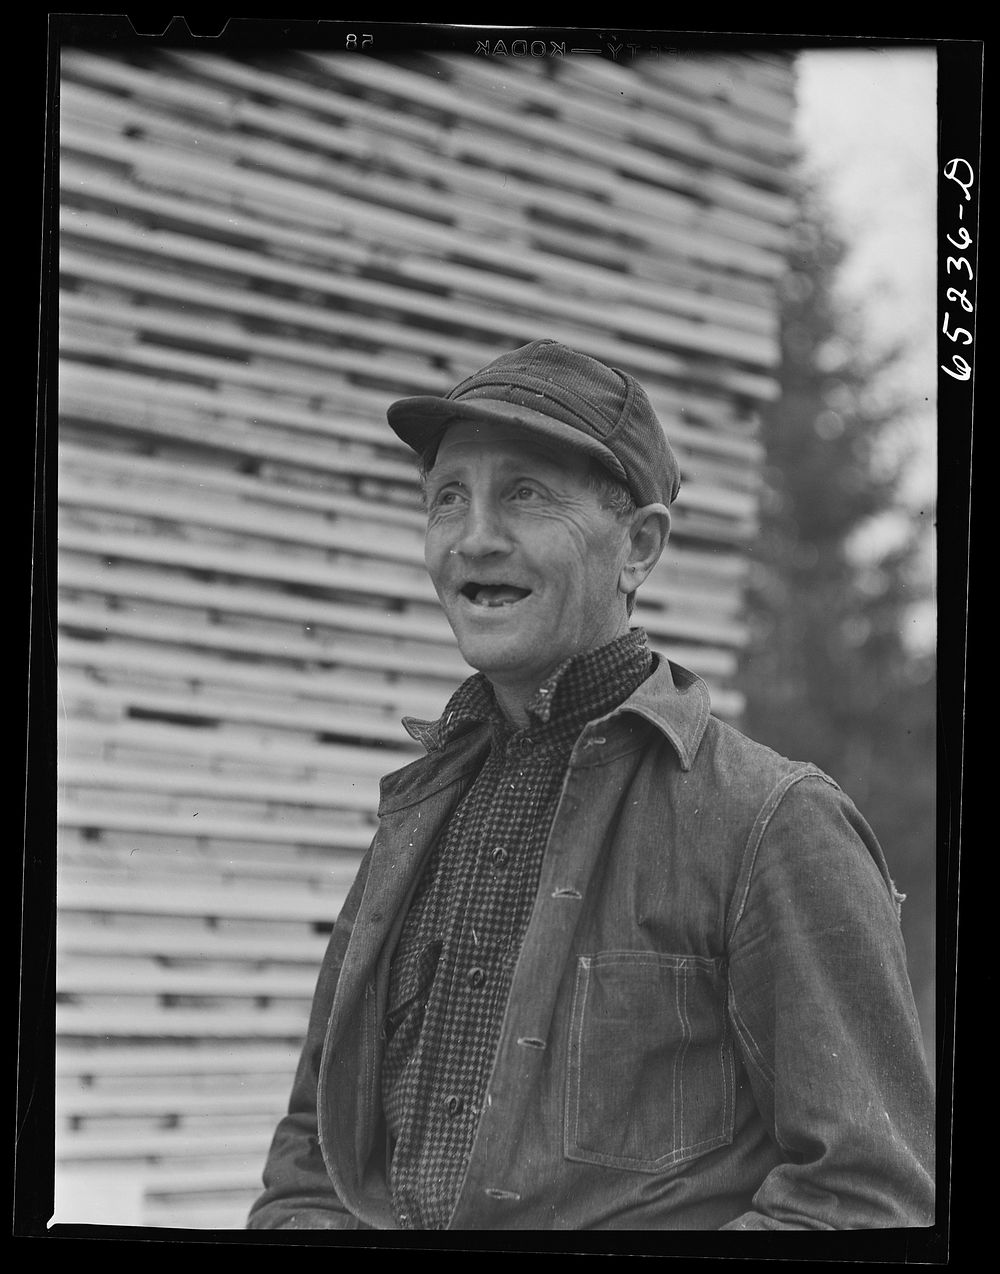 [Untitled photo, possibly related to: Flathead Valley special area project, Montana. Stacking board lumber at the…